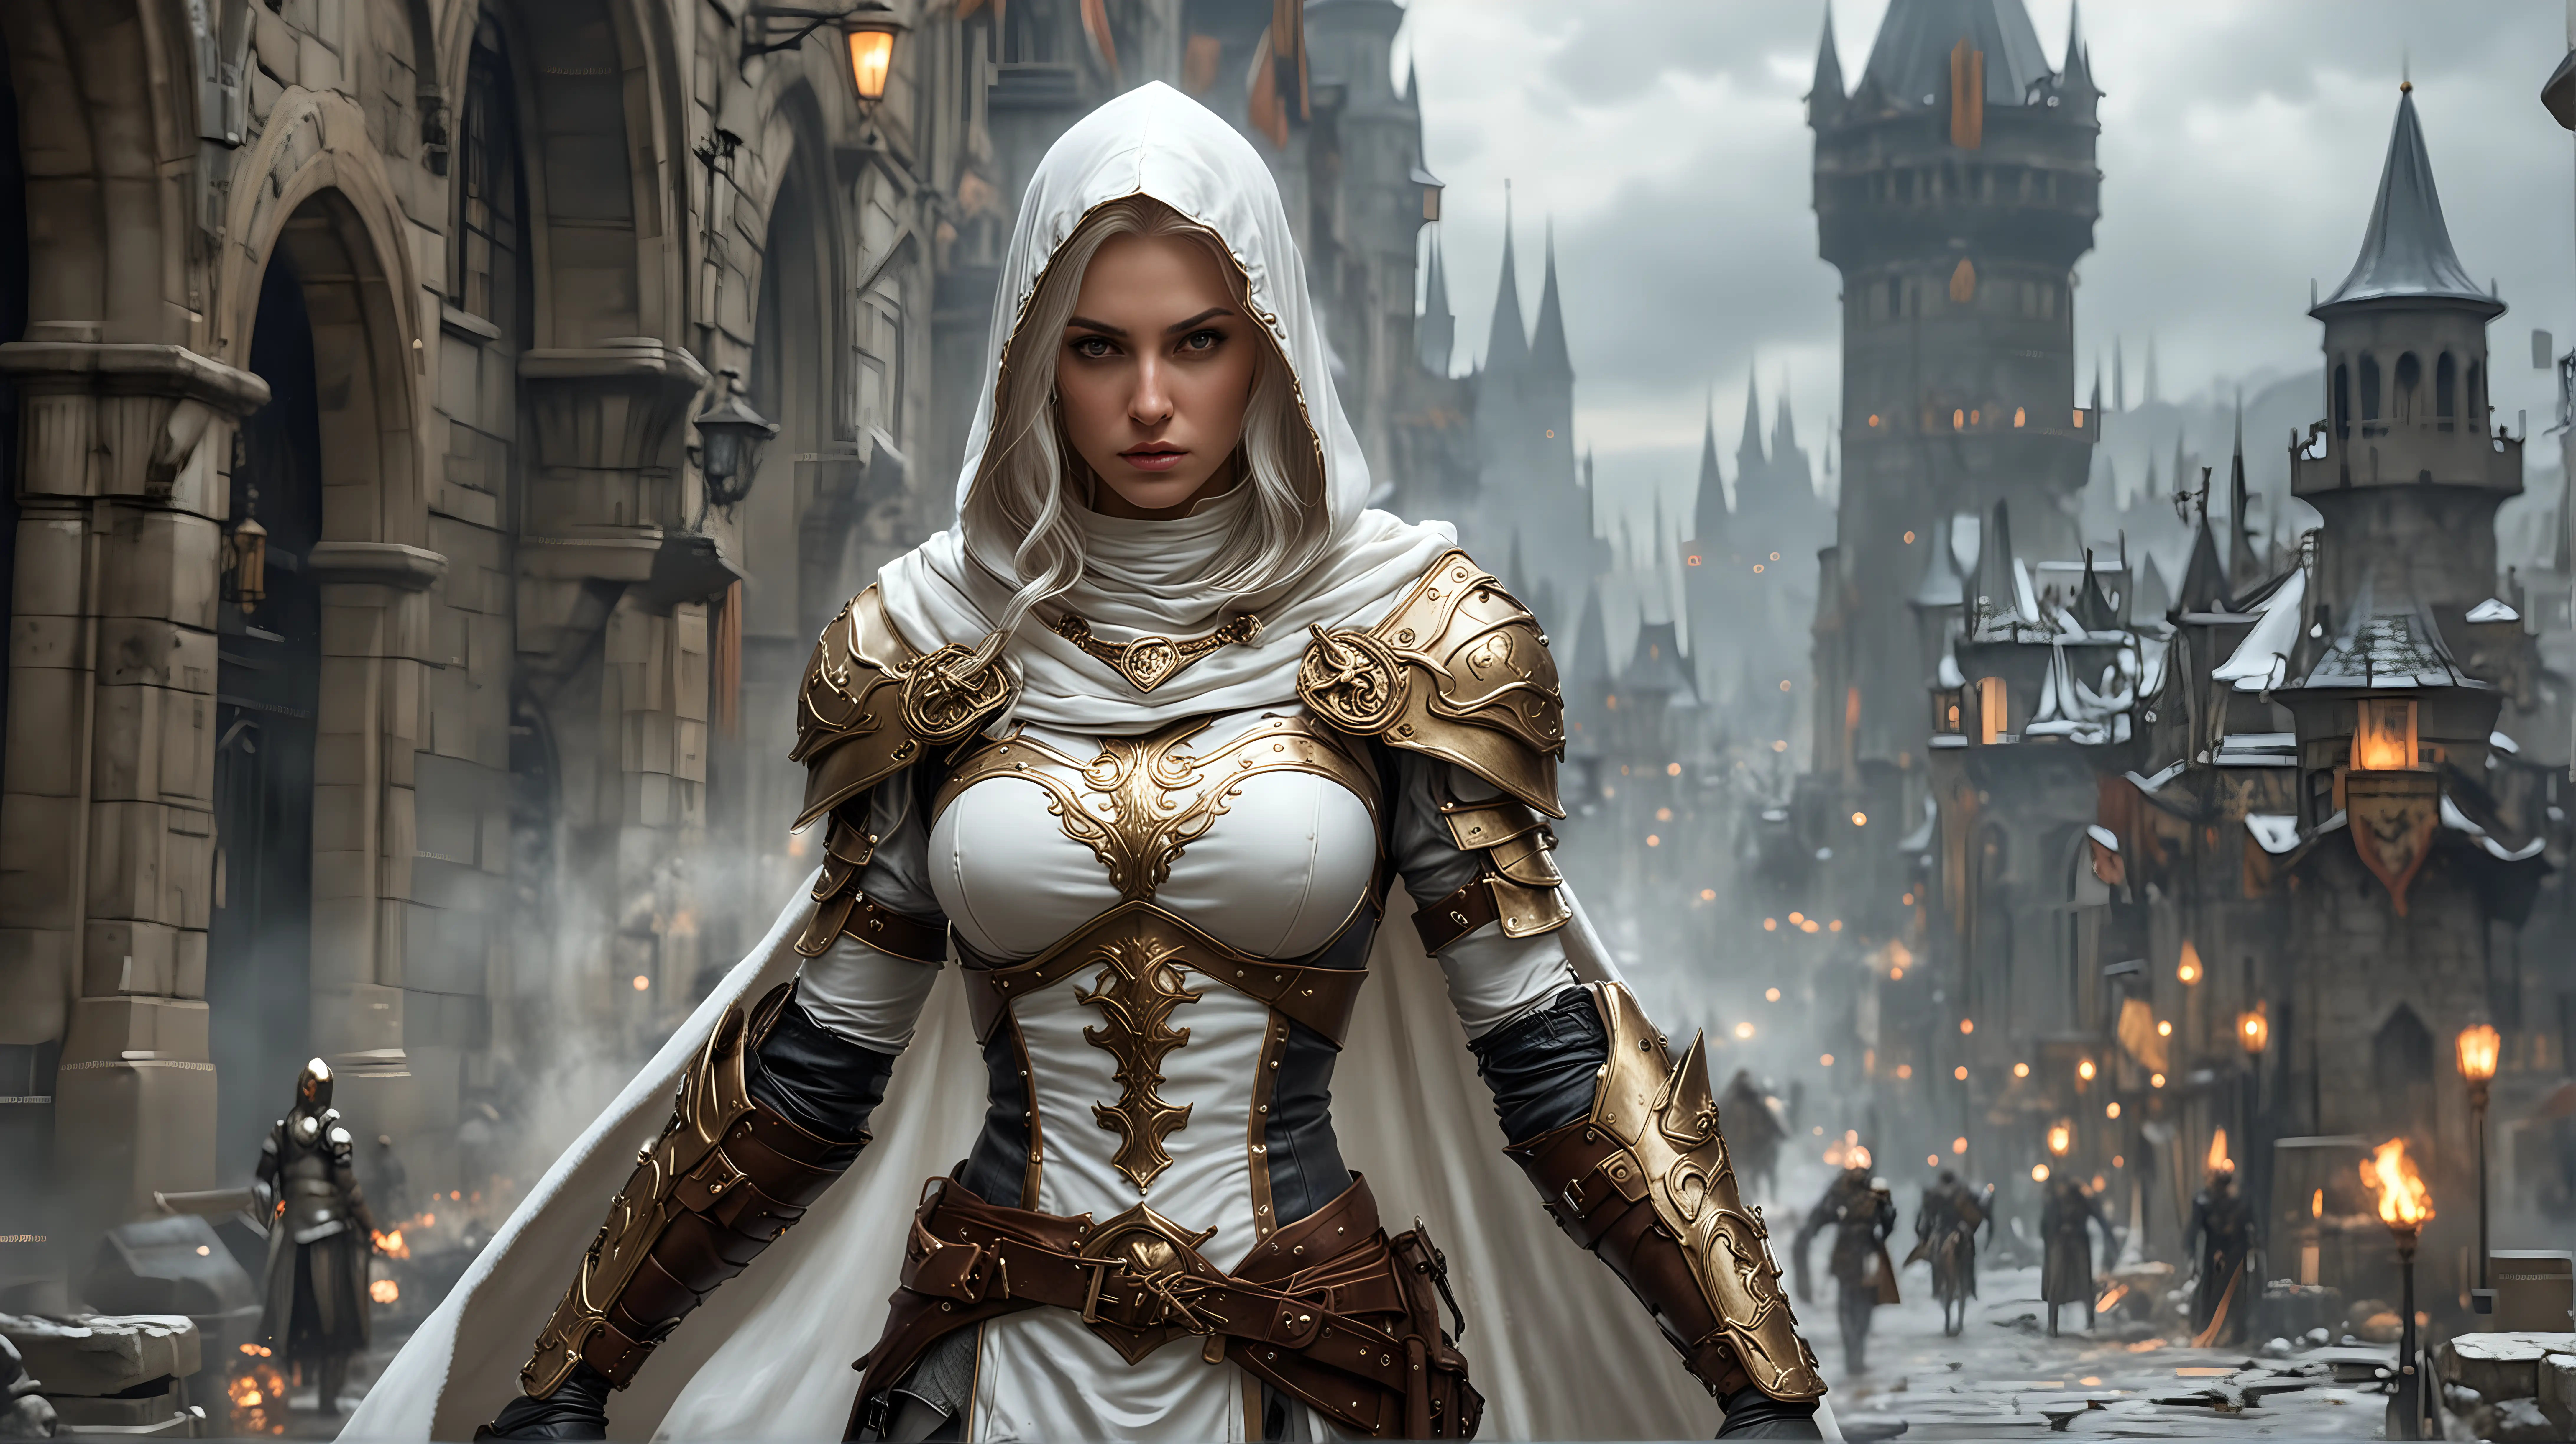 Epic Fantasy Inquisitor Knight with Woman in White Hood and Cloak